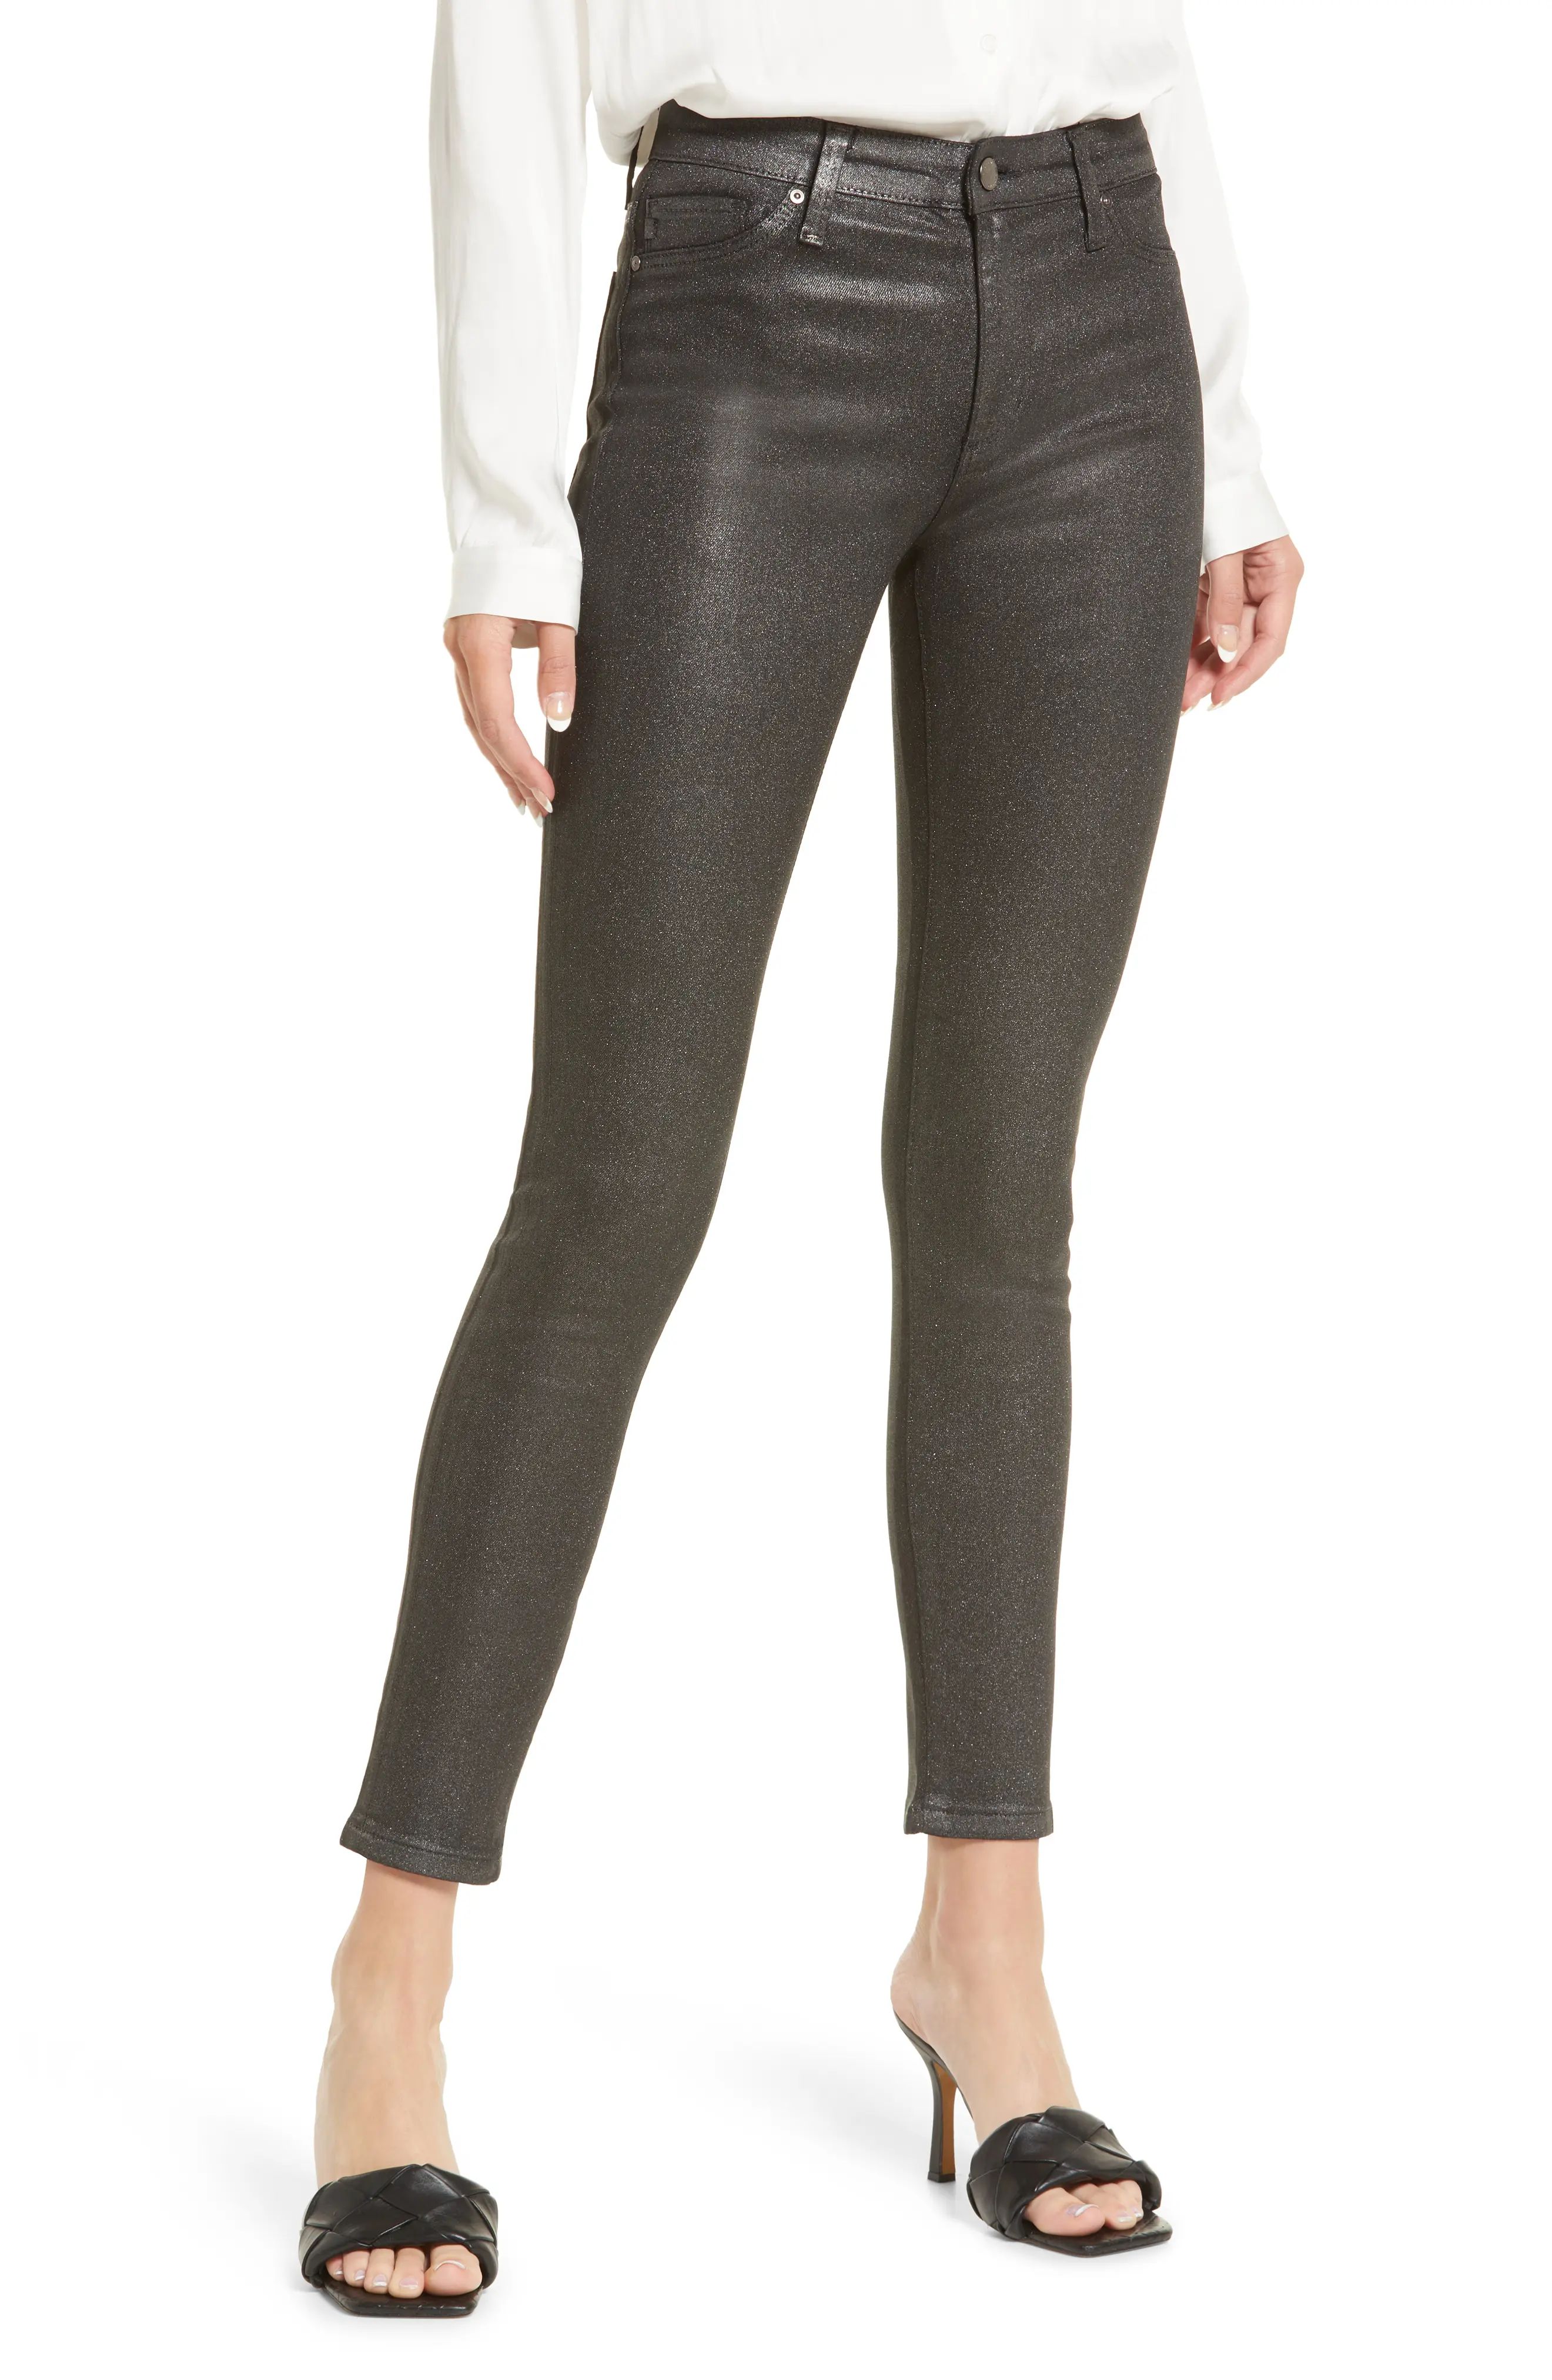 AG The Farrah High Waist Ankle Skinny Faux Leather Pants in Luminous Gunmetal at Nordstrom, Size 33 | Nordstrom